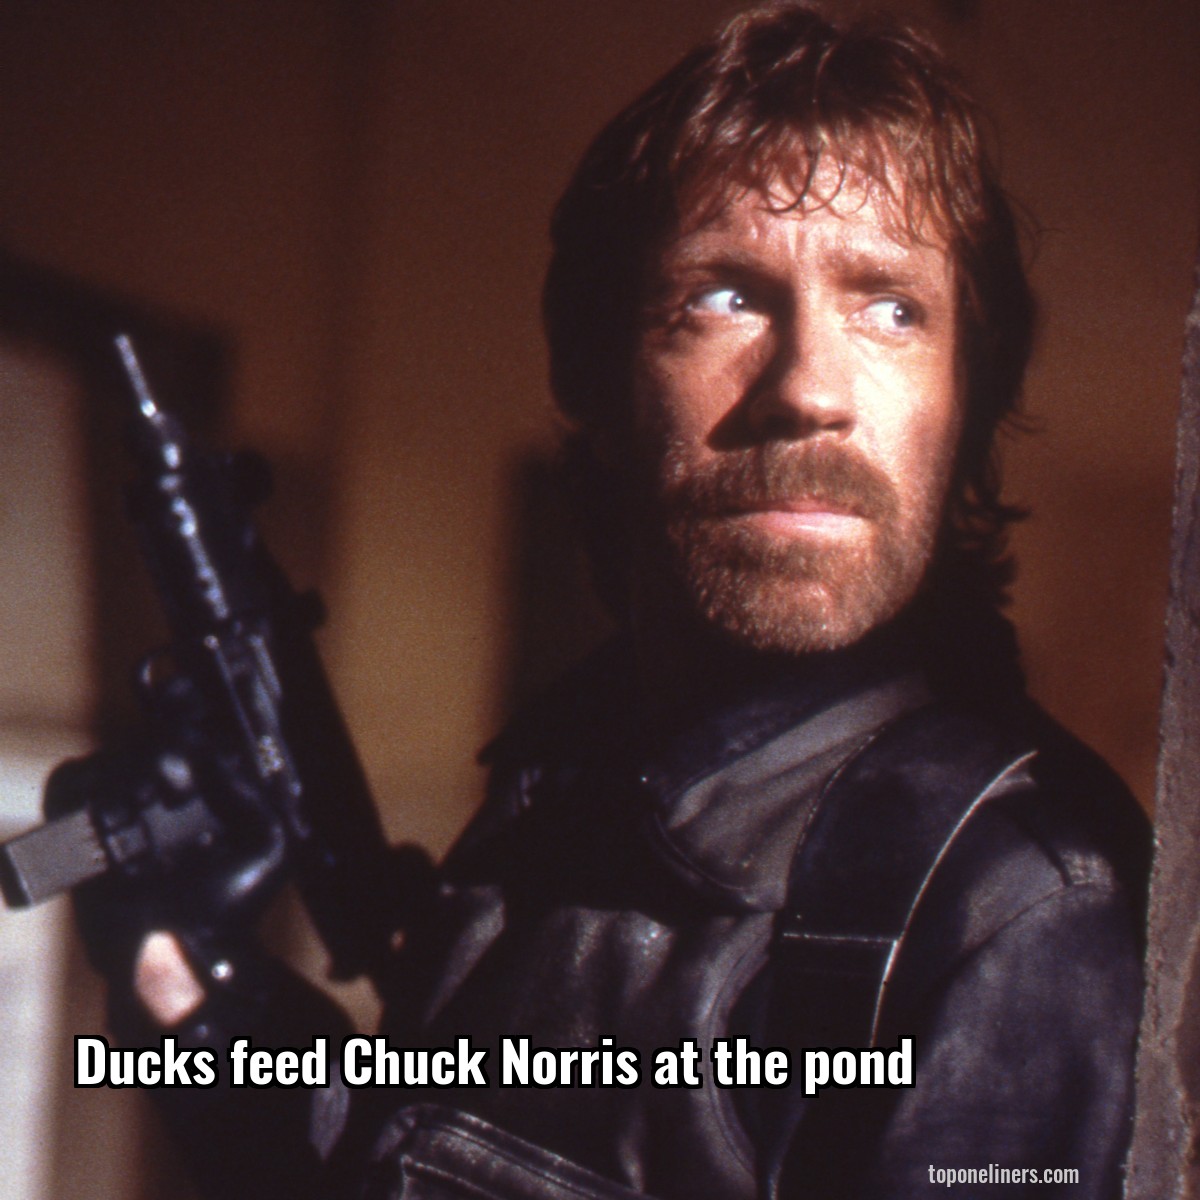 Ducks feed Chuck Norris at the pond